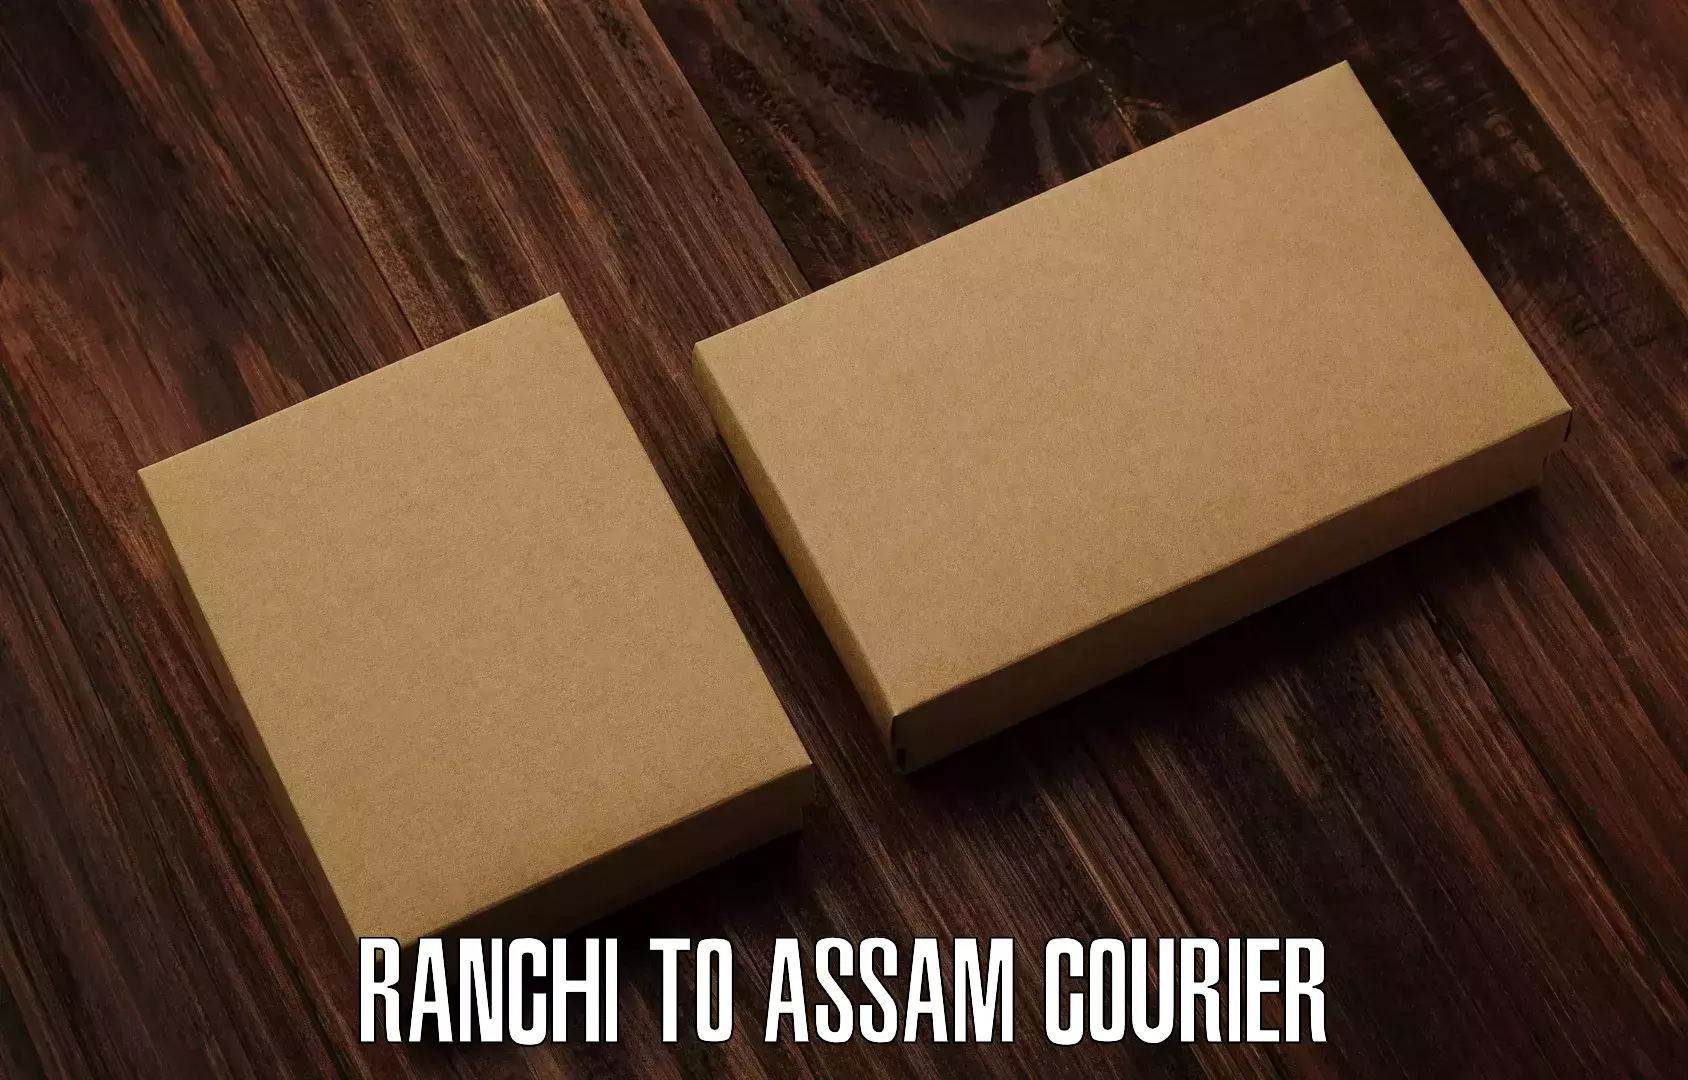 On-call courier service Ranchi to Assam